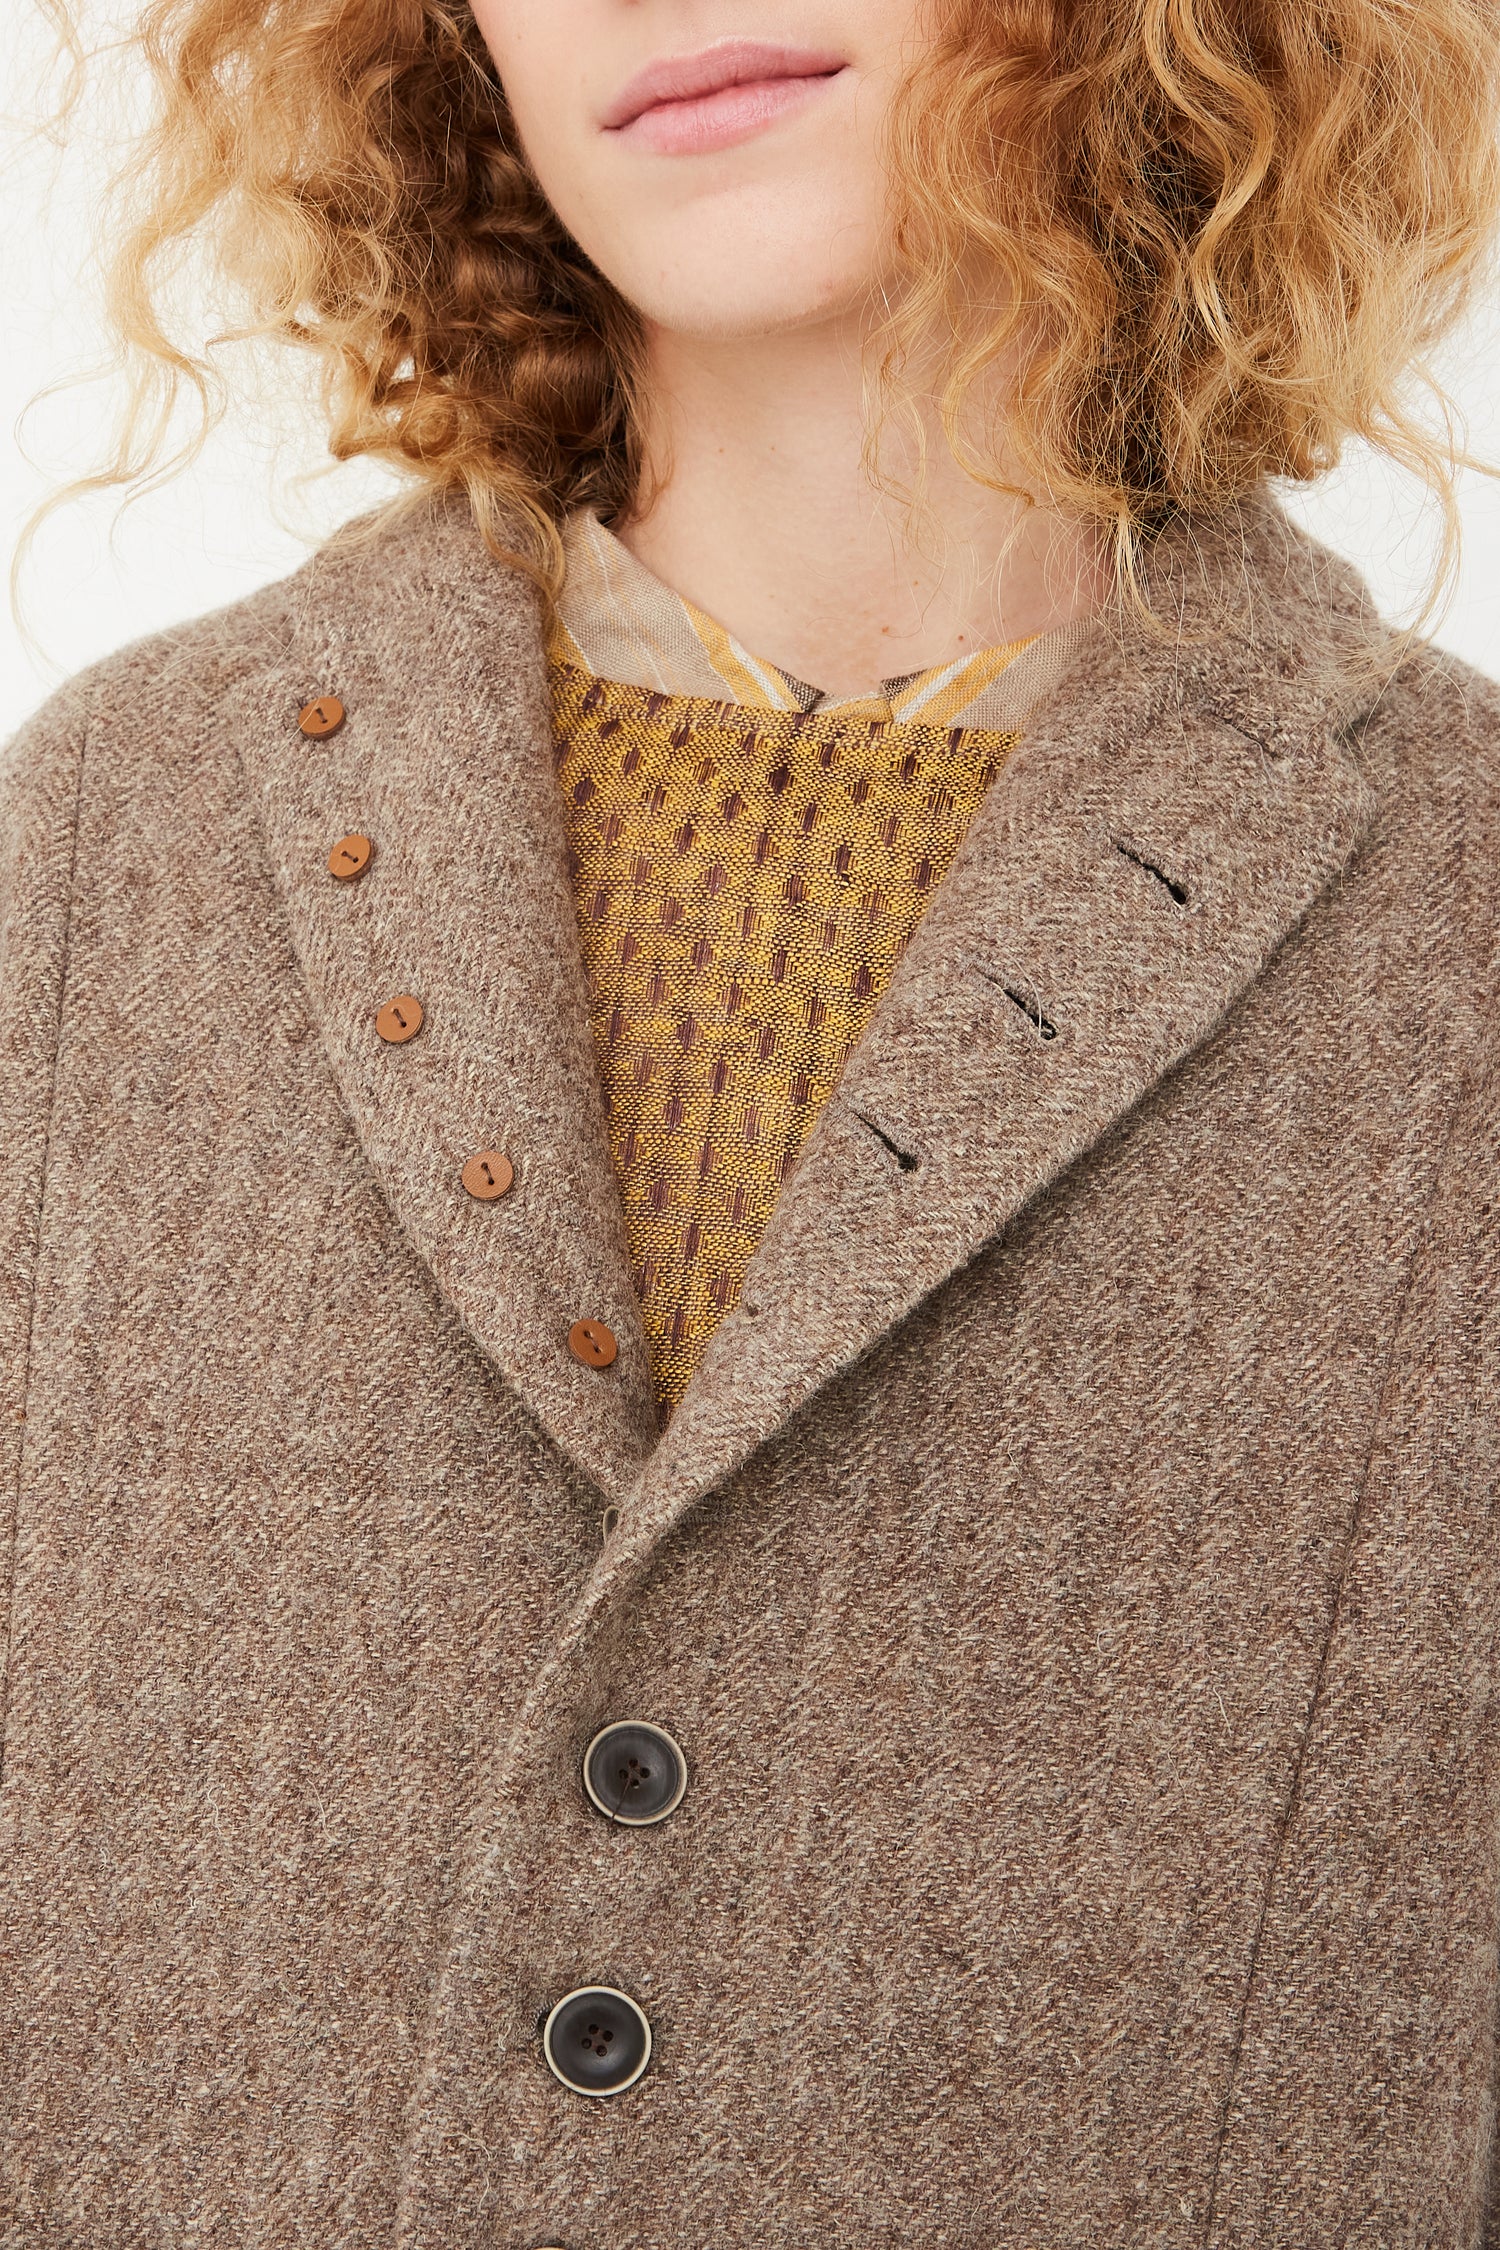 A model wearing an oversized Wool Herringbone Jacket in Mocha by Ichi Antiquités, available at Oroboro store.